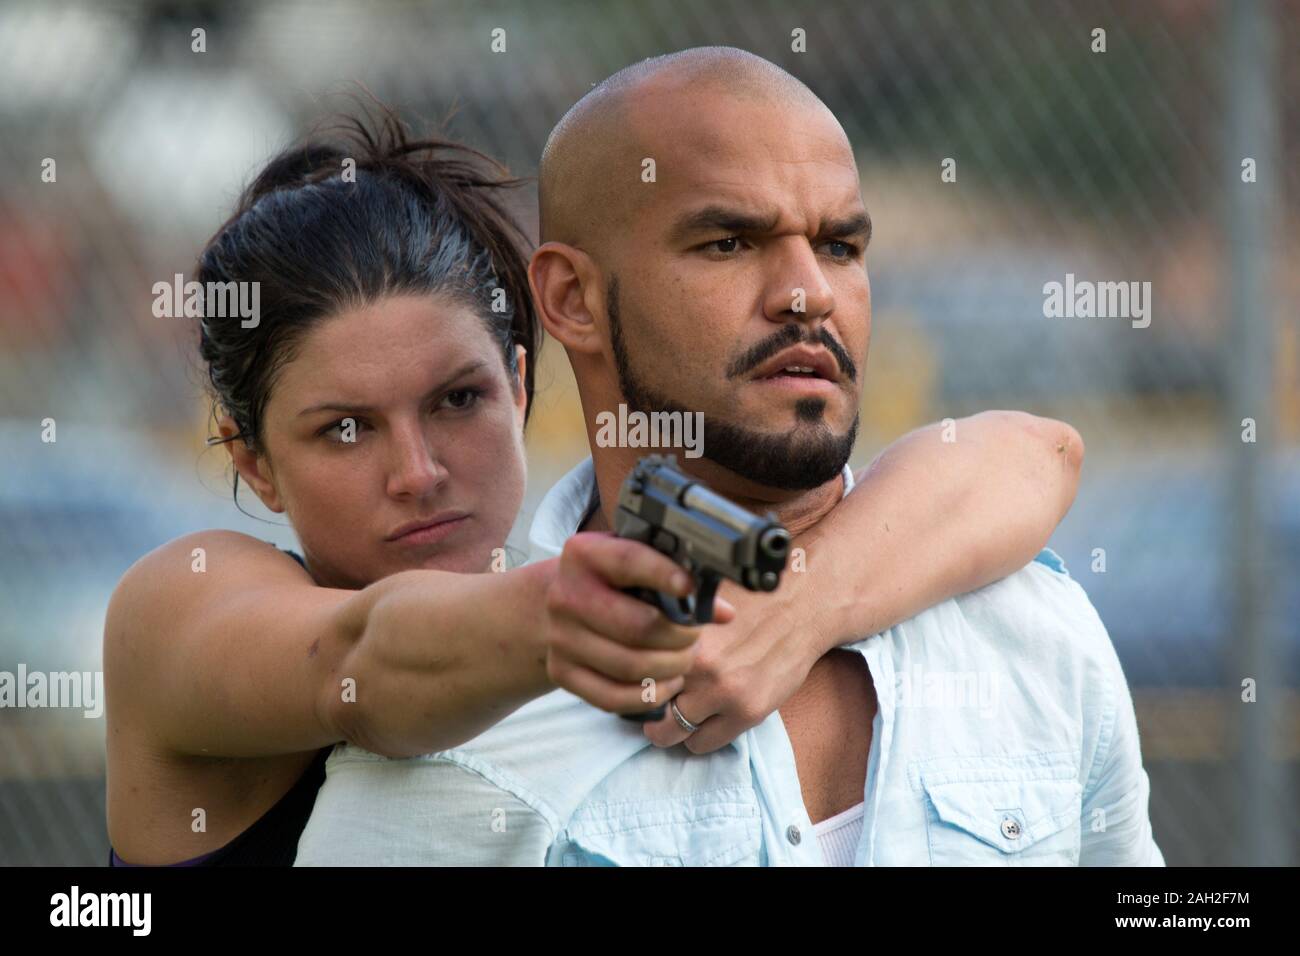 AMAURY NOLASCO and GINA CARANO in IN THE BLOOD (2014), directed by JOHN STOCKWELL. Credit: ANCHOR BAY FILMS / Album Stock Photo